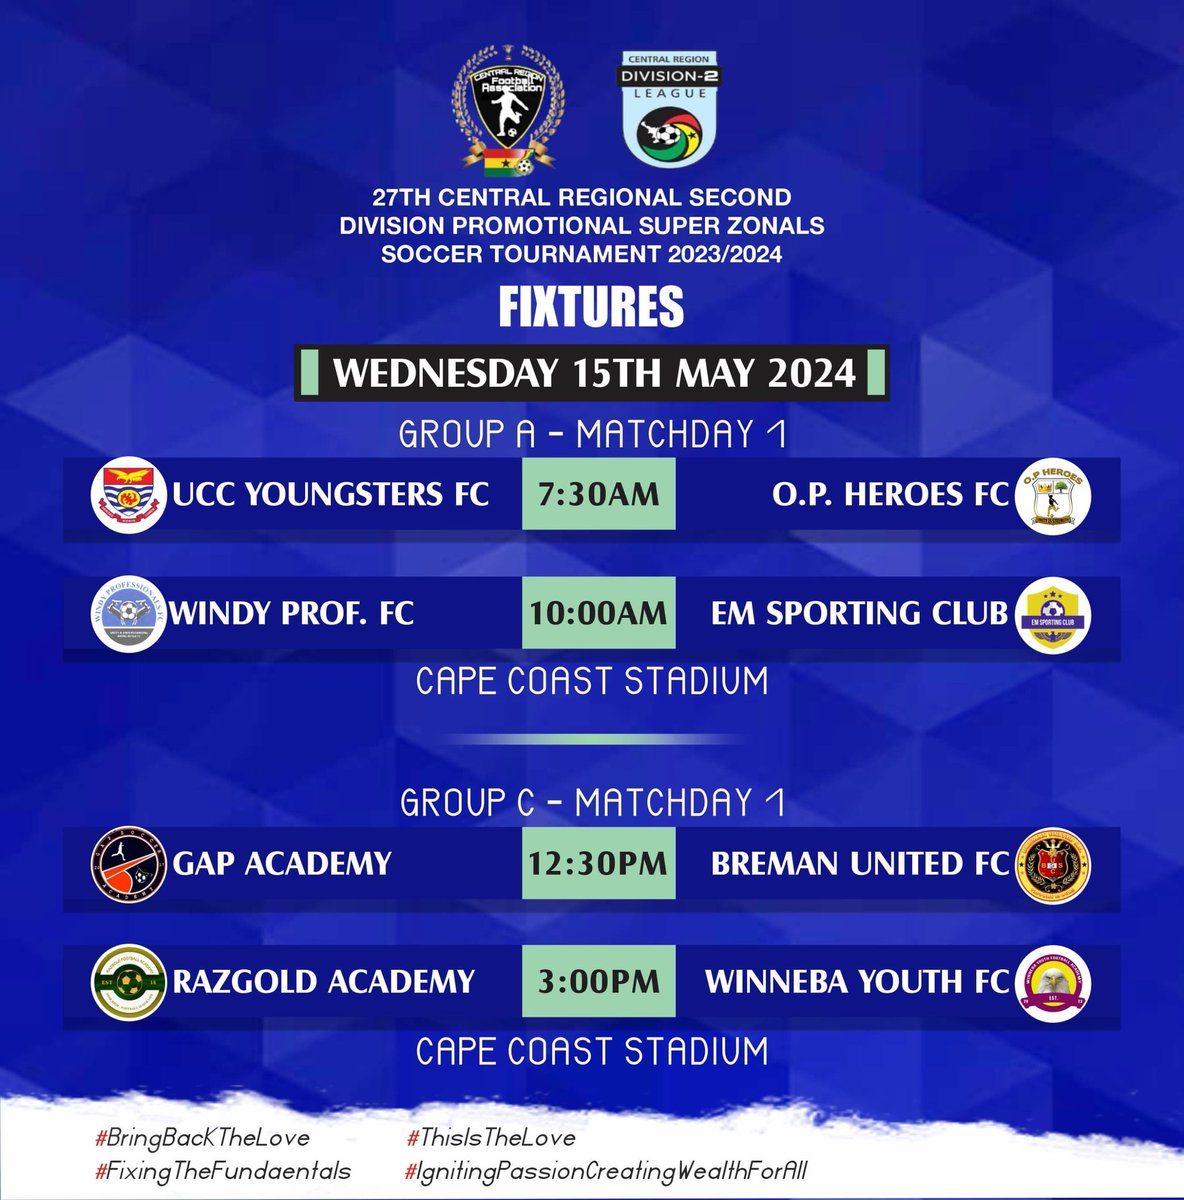 Central Regional Division Two Middle League Fixtures for tomorrow 15/05/2024. The venue is Cape Coast Sports Stadium. The matches start at 7:30am. Came and watch beautiful football